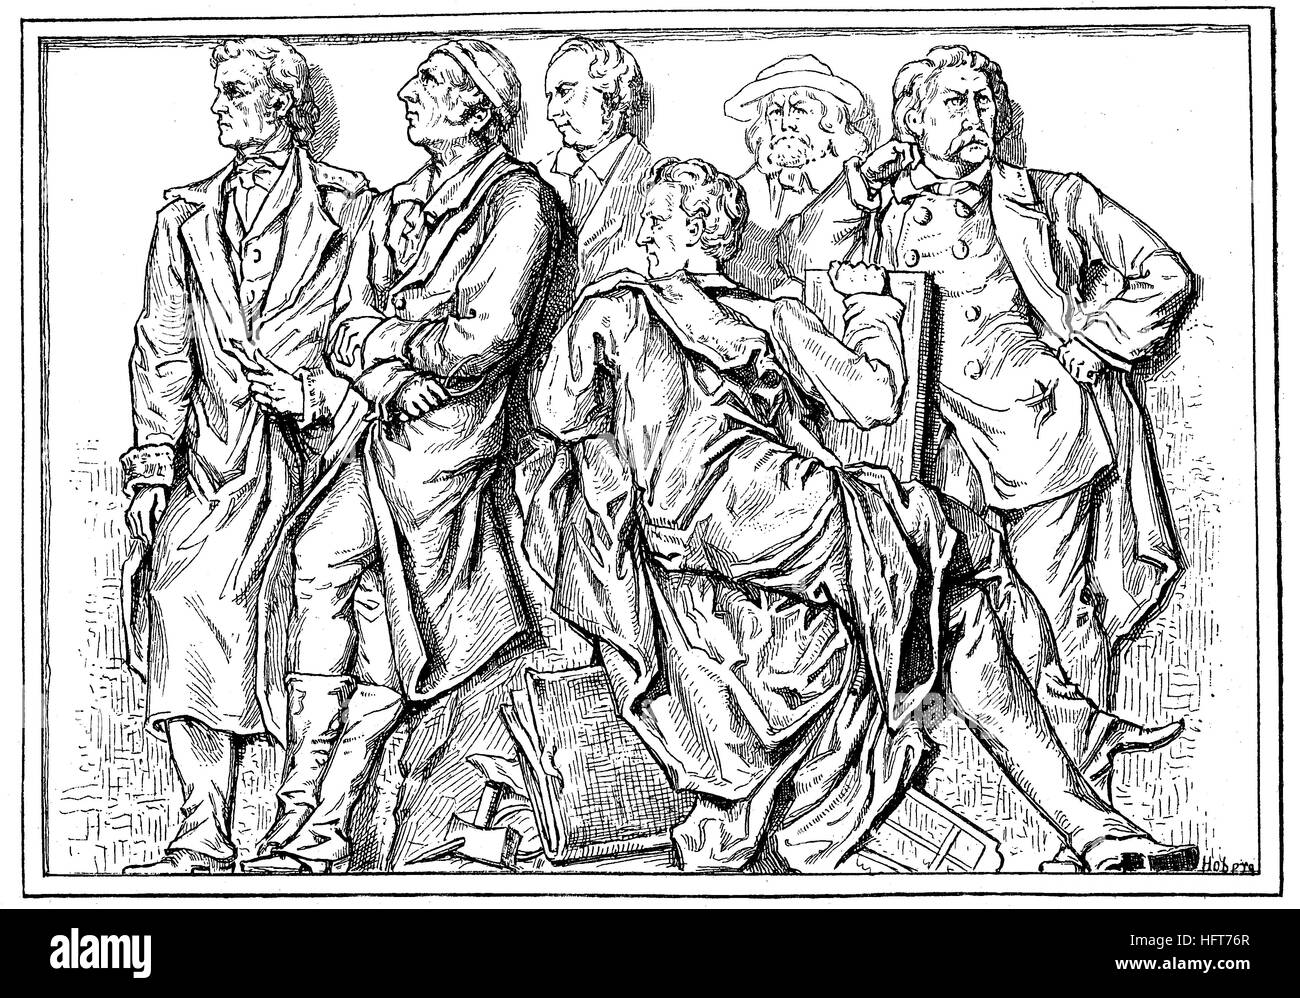 From left, Rietschel, G. Schadow, W. Schadow, Schnorr von Carolsfeld, Rethel und Schwind, are the persons from the Relieffries of Geyer in the National Gallery of Berlin, Germany, woodcut from the year 1885, digital improved Stock Photo